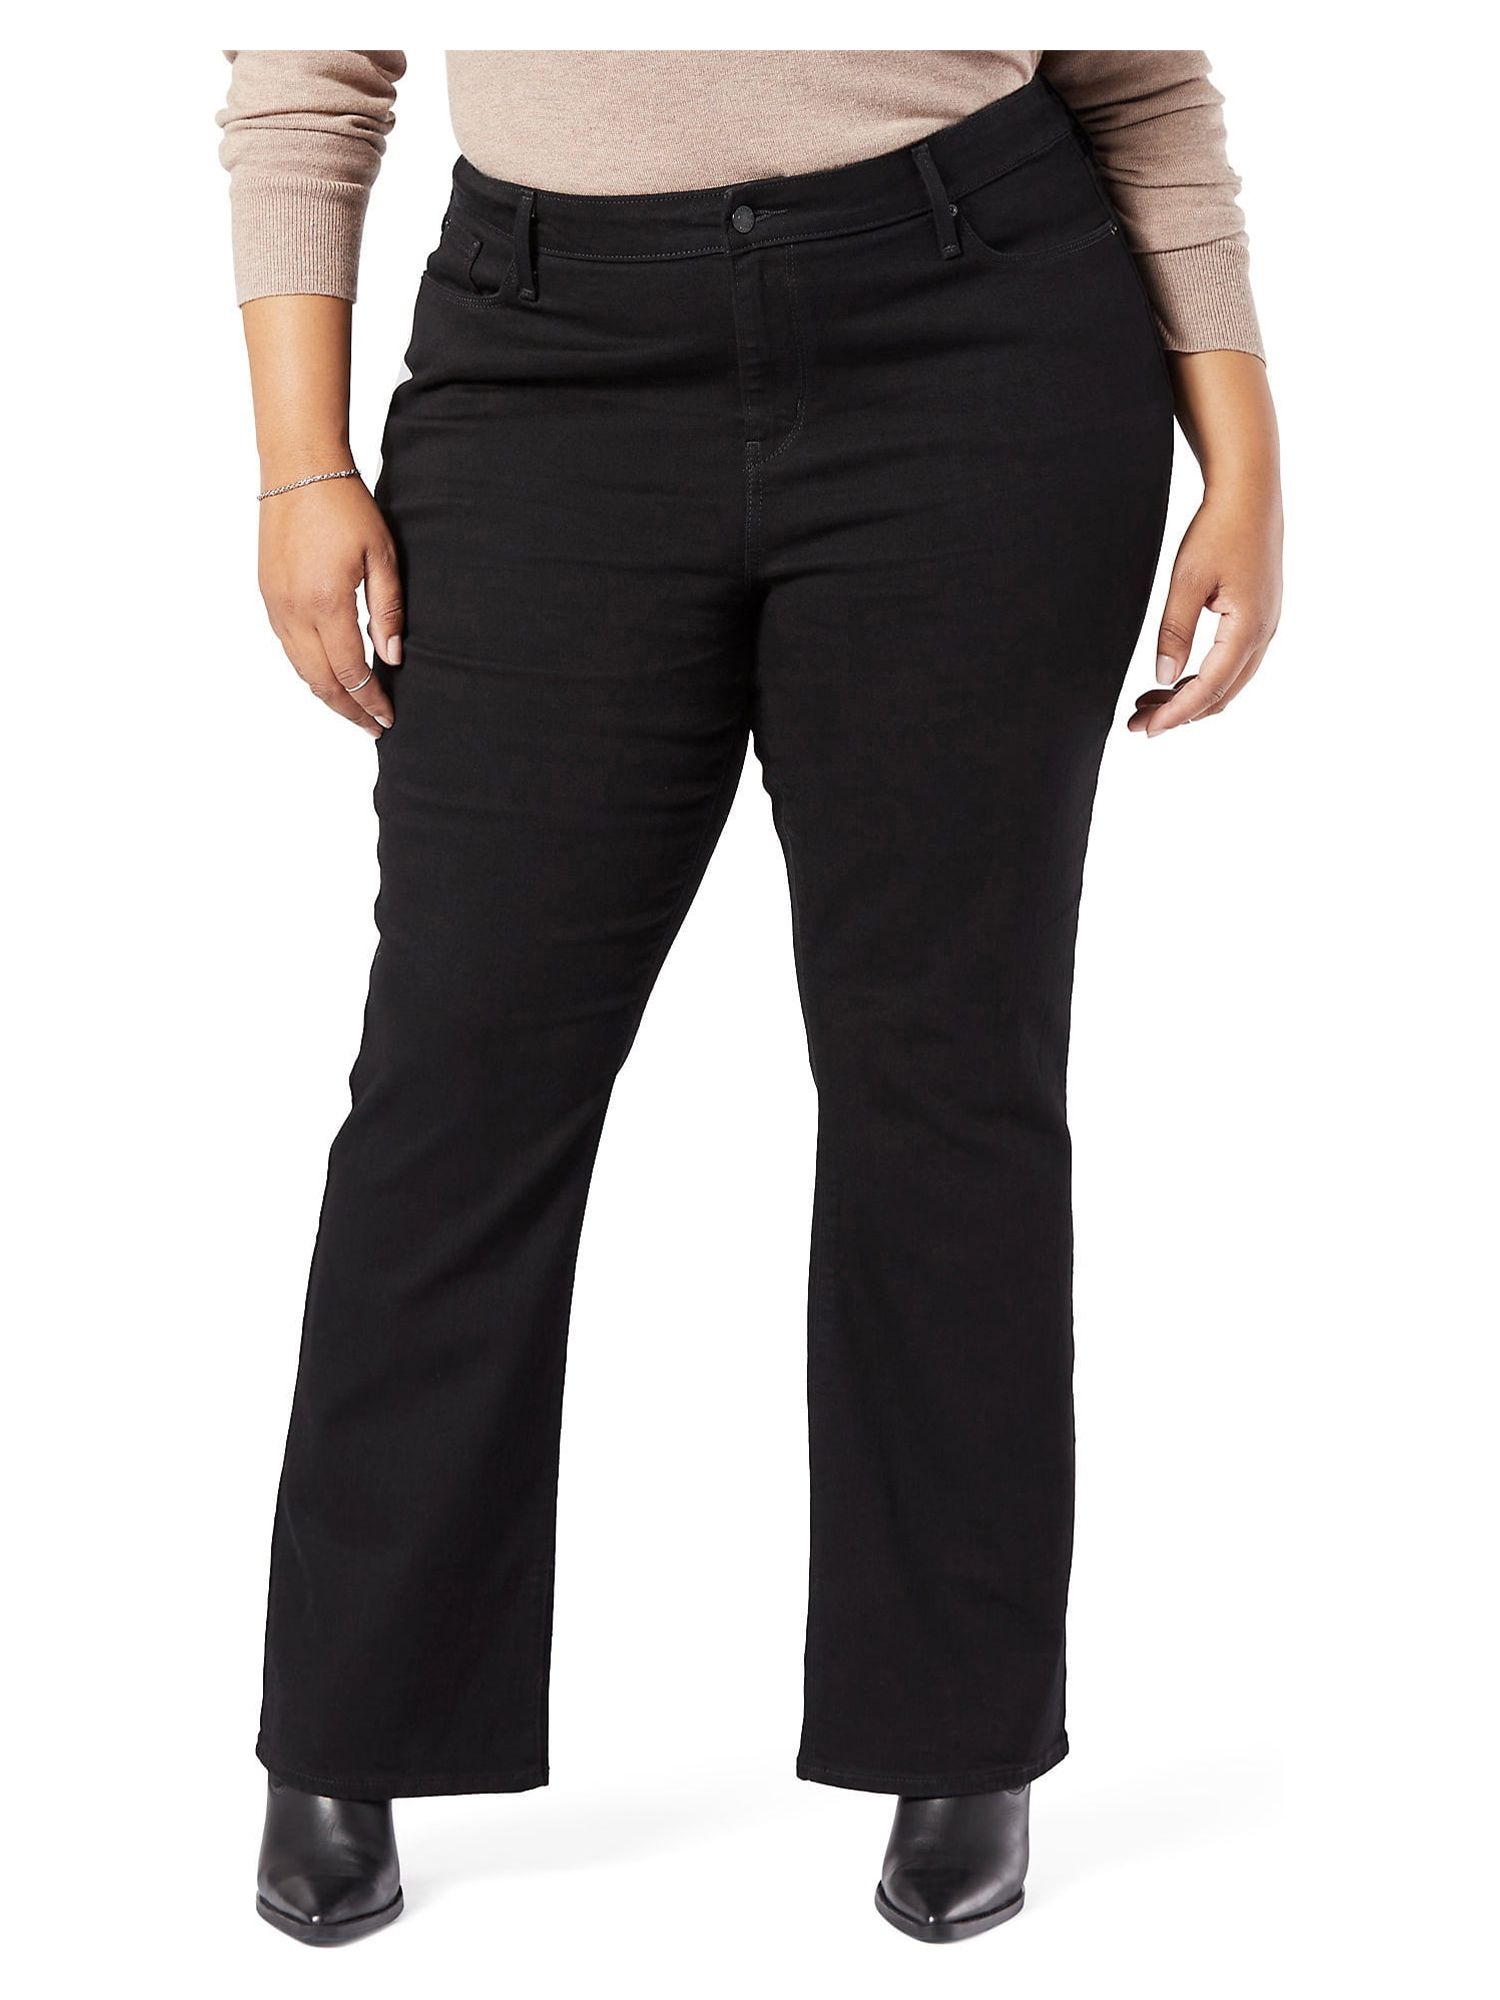 Signature by Levi Strauss & Co. Women's and Women's Plus Modern Bootcut Jeans - image 1 of 5